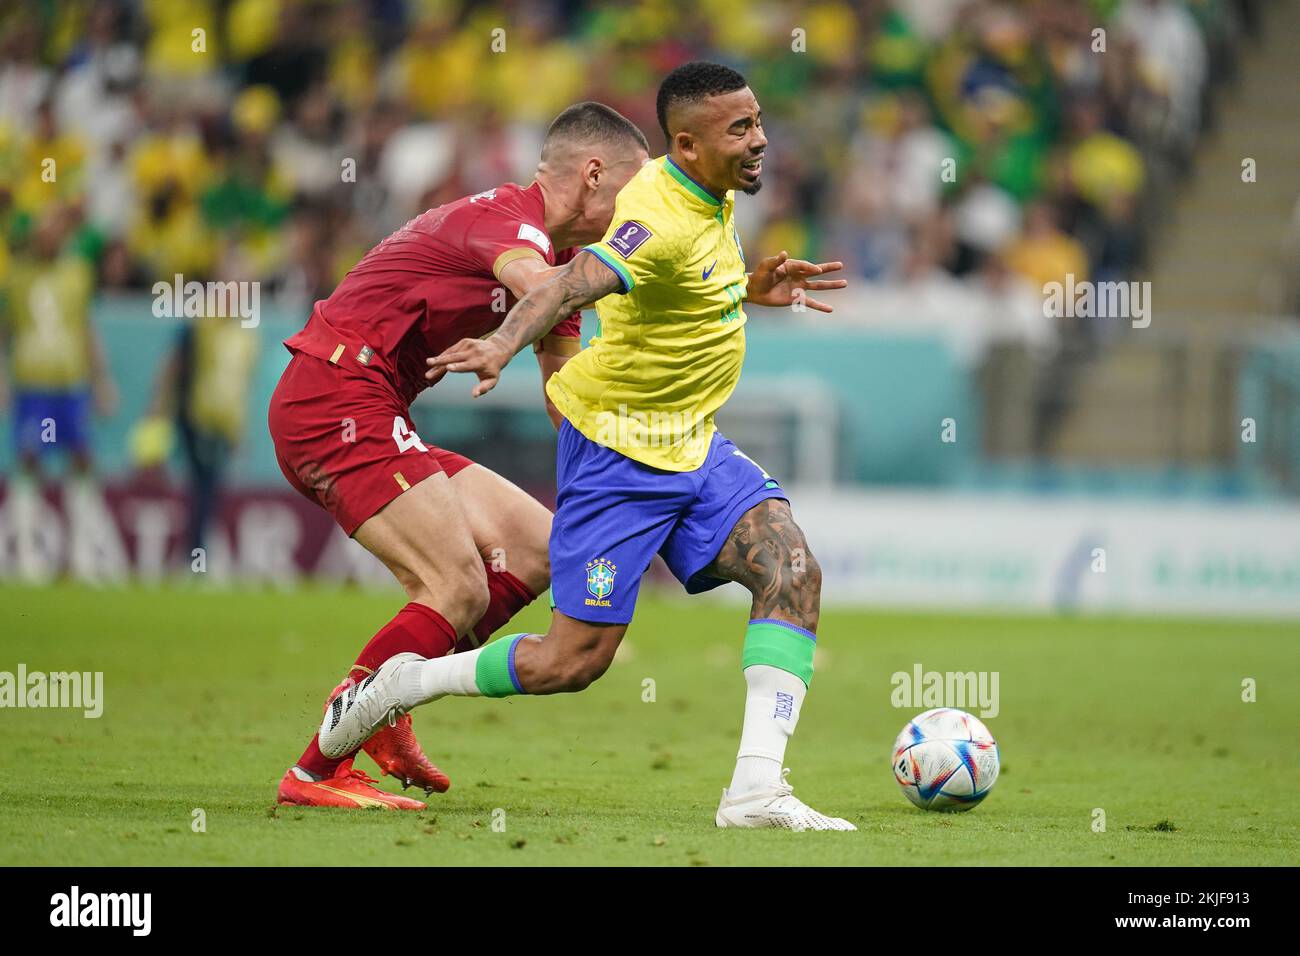 LUSAIL, QATAR - NOVEMBER 24: Player of Brazil Gabriel Jesus fights for the ball with player of Serbia Nikola Milenkovic during the FIFA World Cup Qatar 2022 group G match between Brazil and Serbia at Lusail Stadium on November 24, 2022 in Lusail, Qatar. (Photo by Florencia Tan Jun/PxImages) Credit: Px Images/Alamy Live News Stock Photo